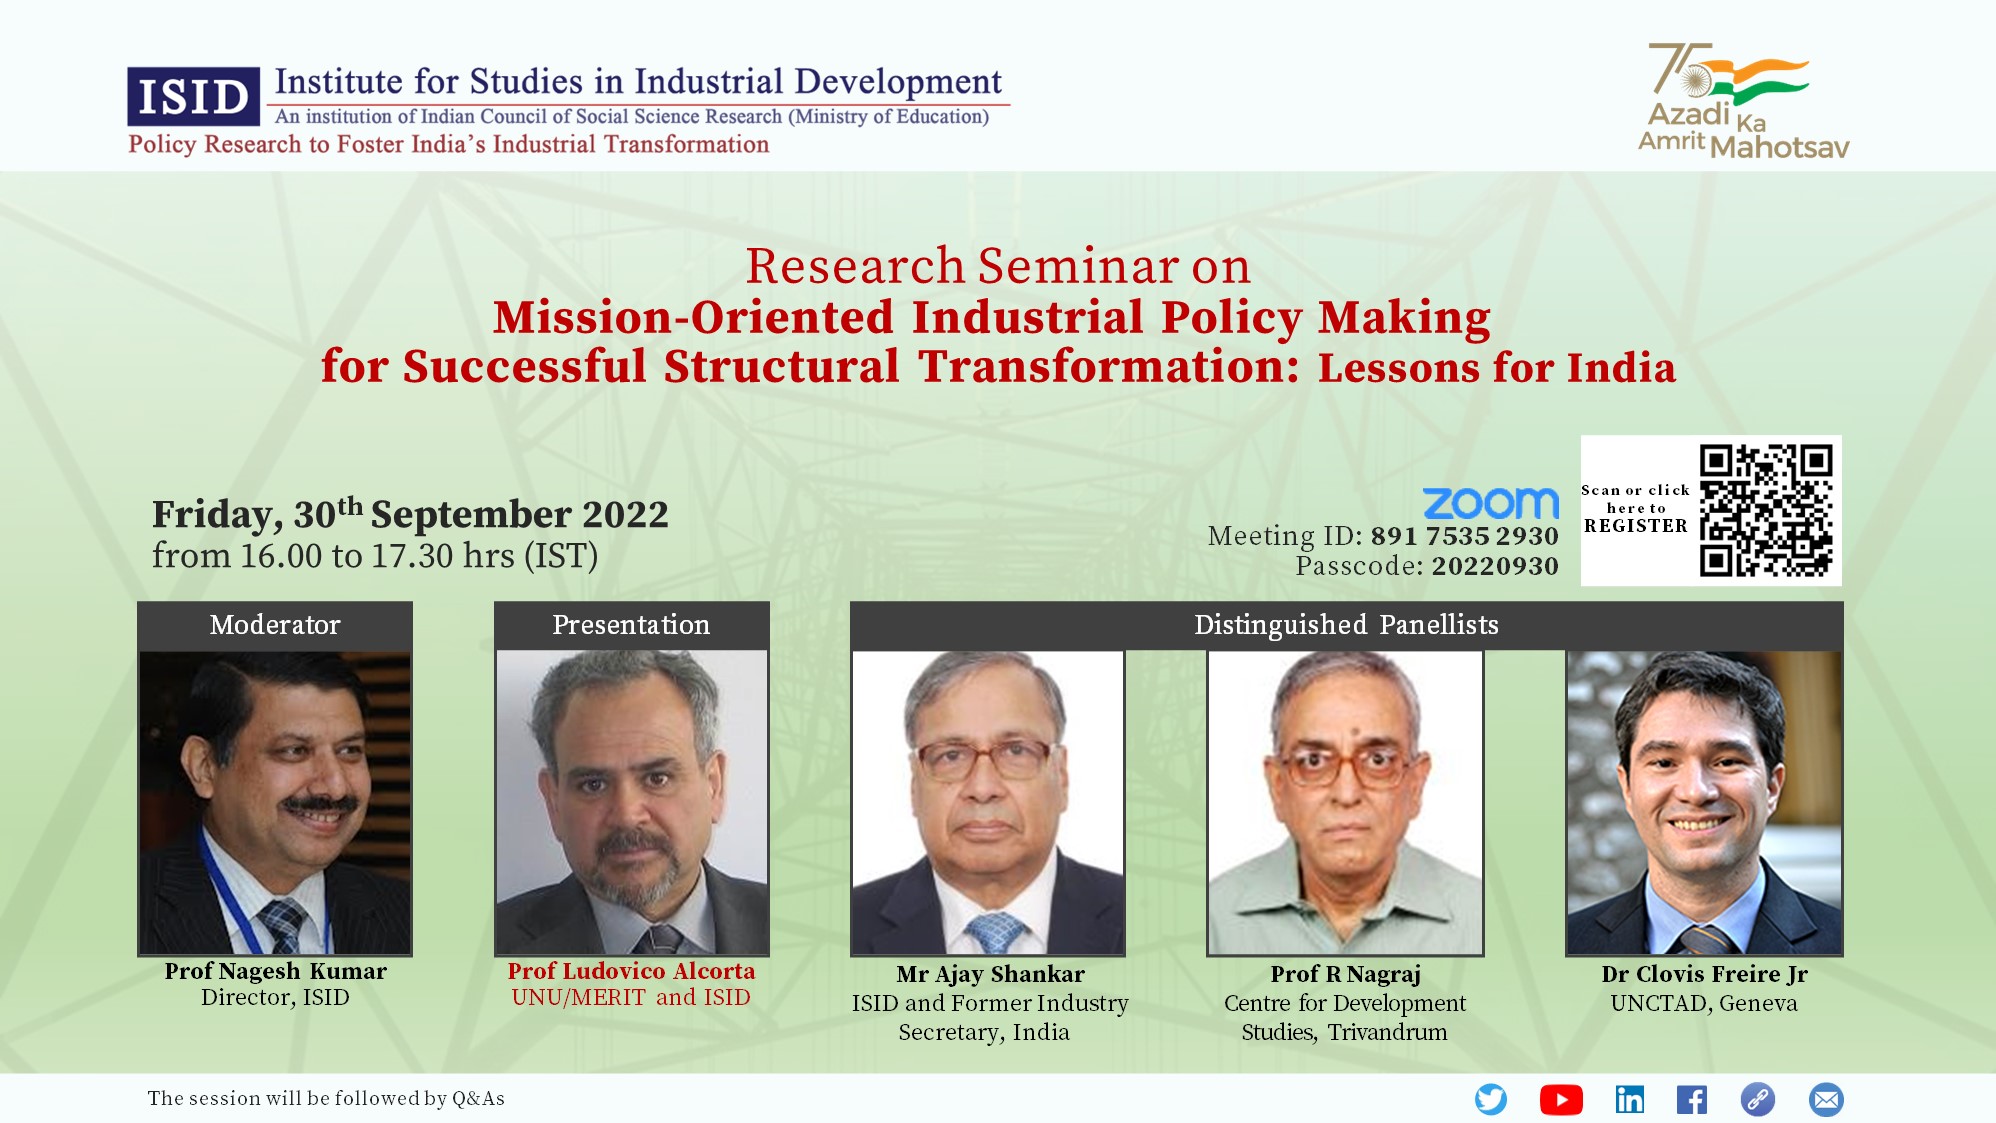 Policy Roundtable on Mission-Oriented Industrial Policy Making for Successful Structural Transformation: Lessons for India